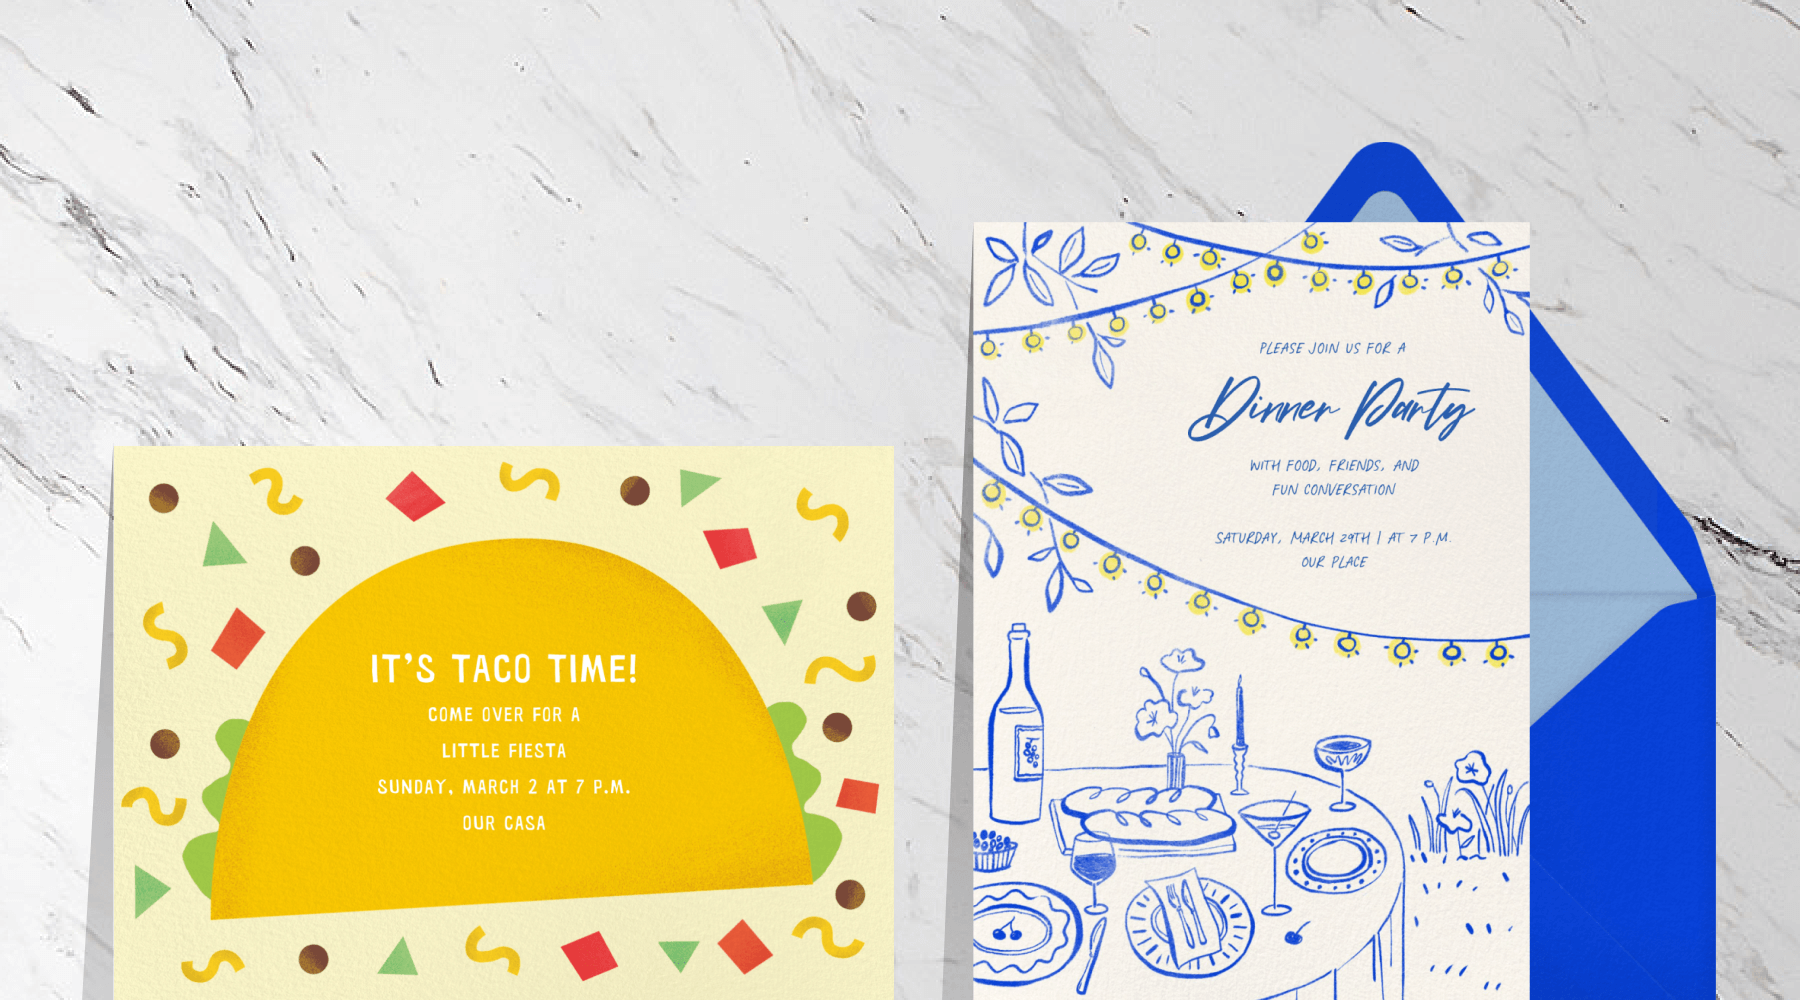 An invitation with a yellow taco surrounded by taco filling confetti; an invitation with a blue illustration of an outdoor table set for a dinner party with yellow string lights overhead and a blue envelope.